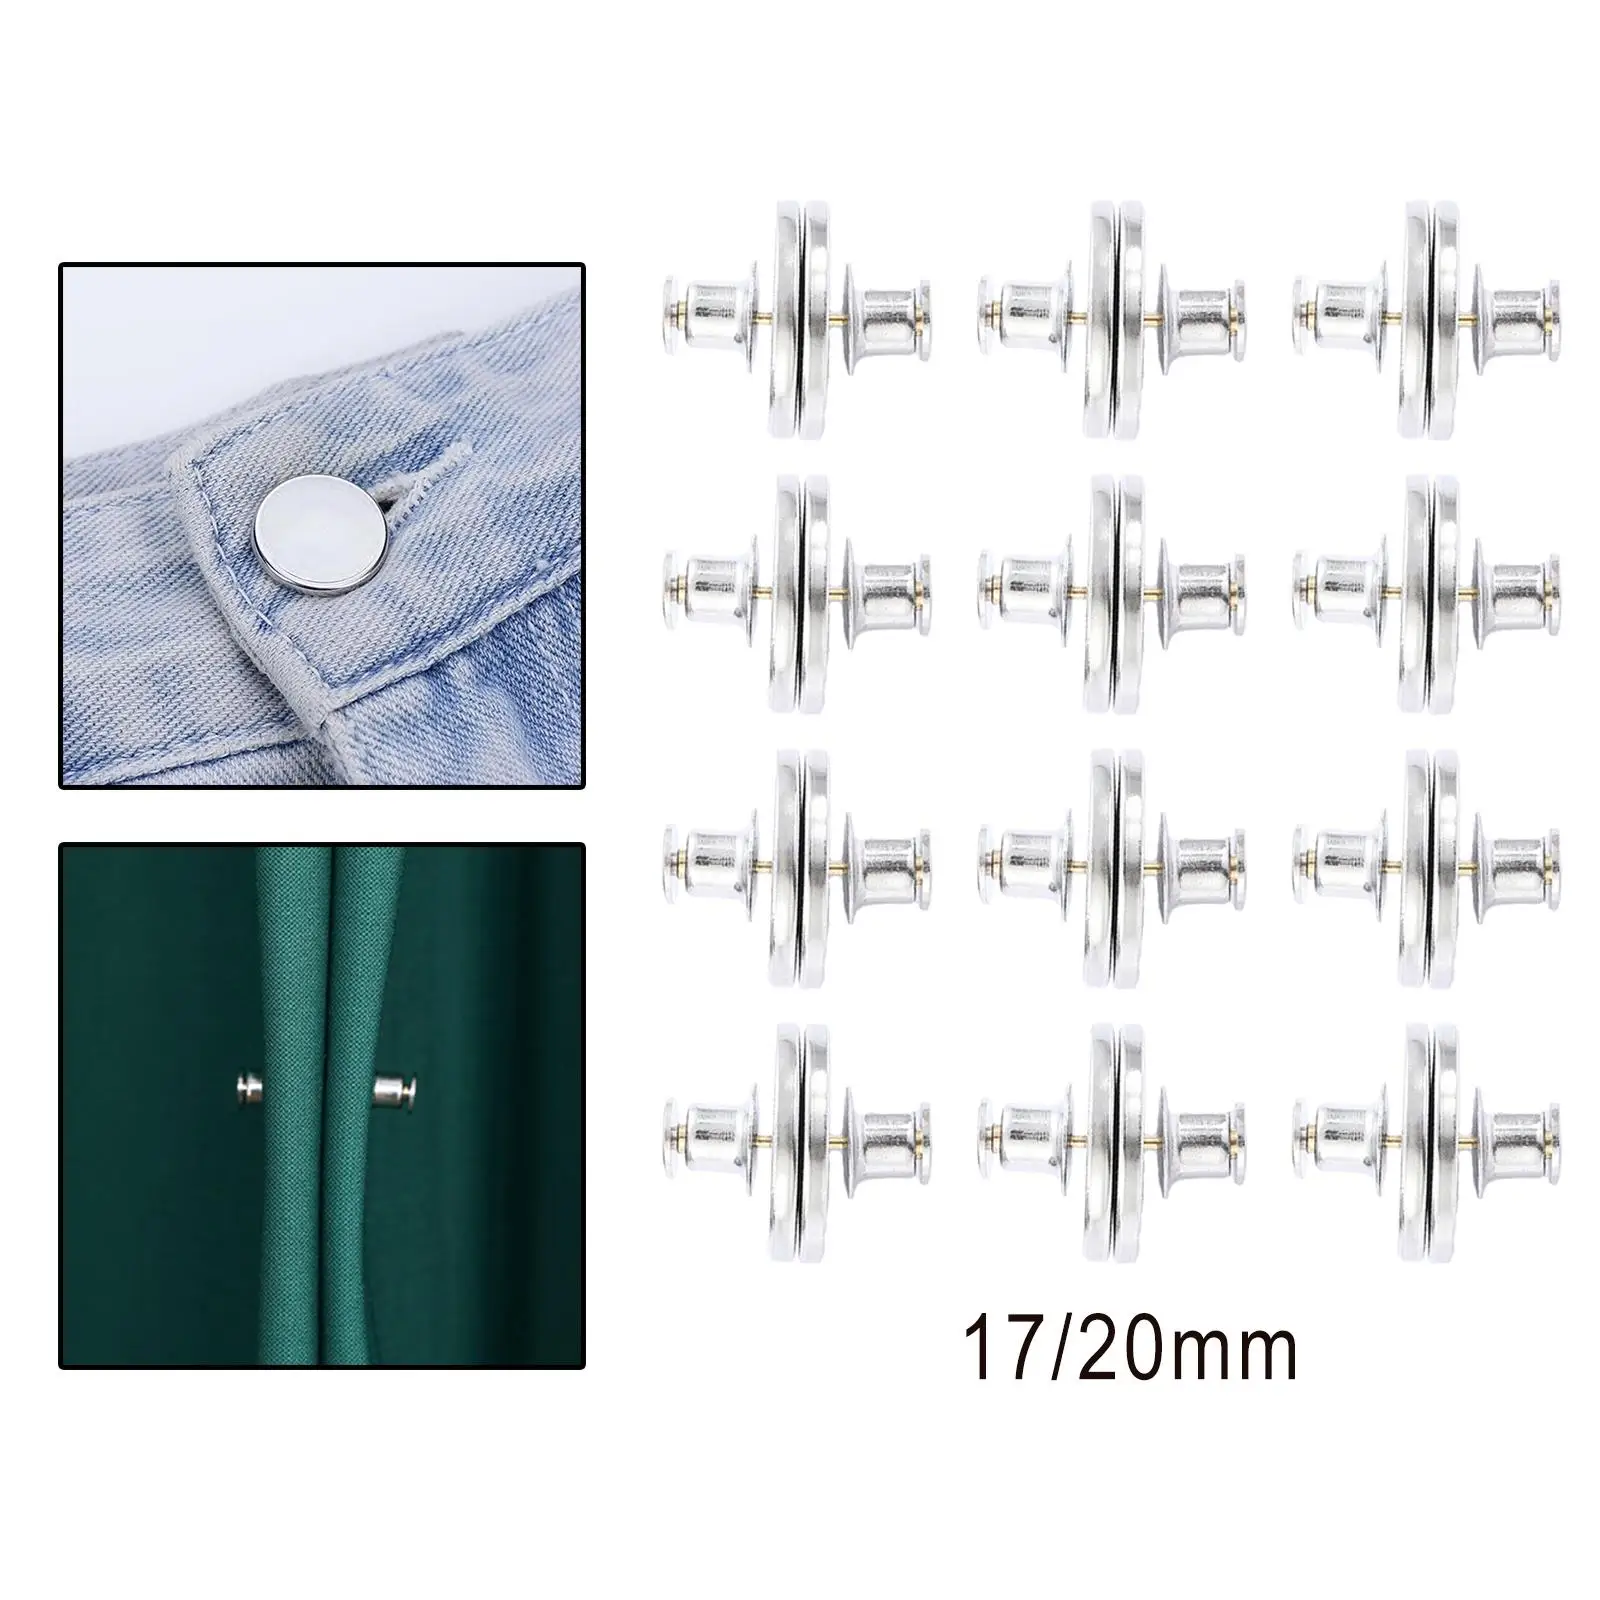 6 Pair Curtain Magnetic Button Removable No Tool Instant No Sew for Clothing